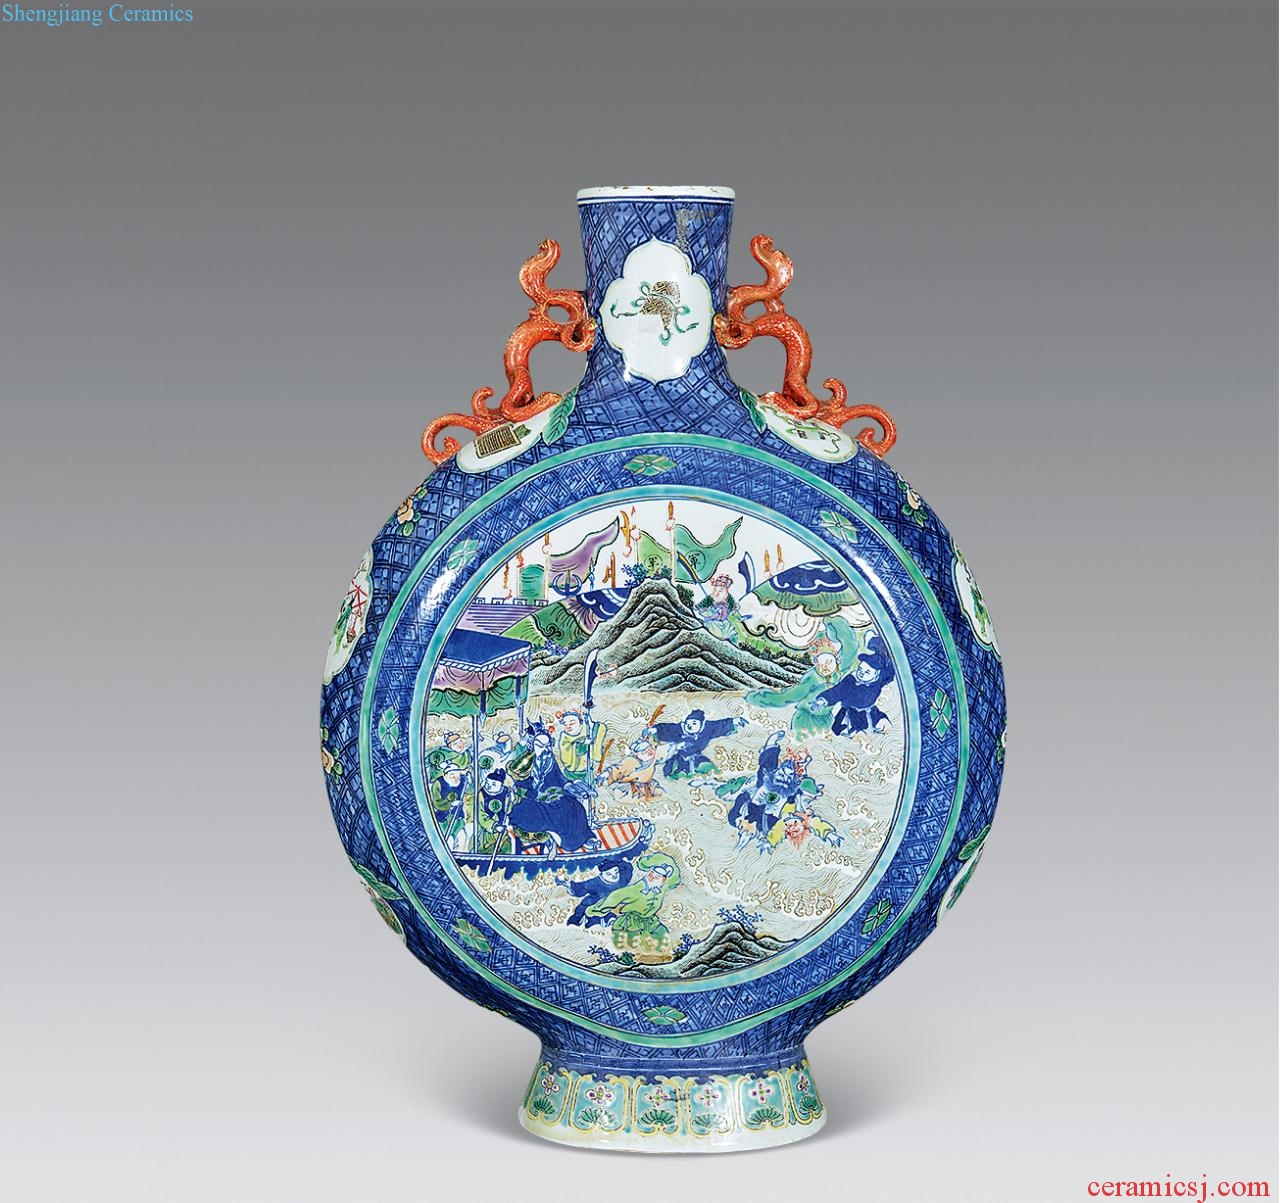 In late qing dynasty Blue and white enamel characters tattooed on bottles